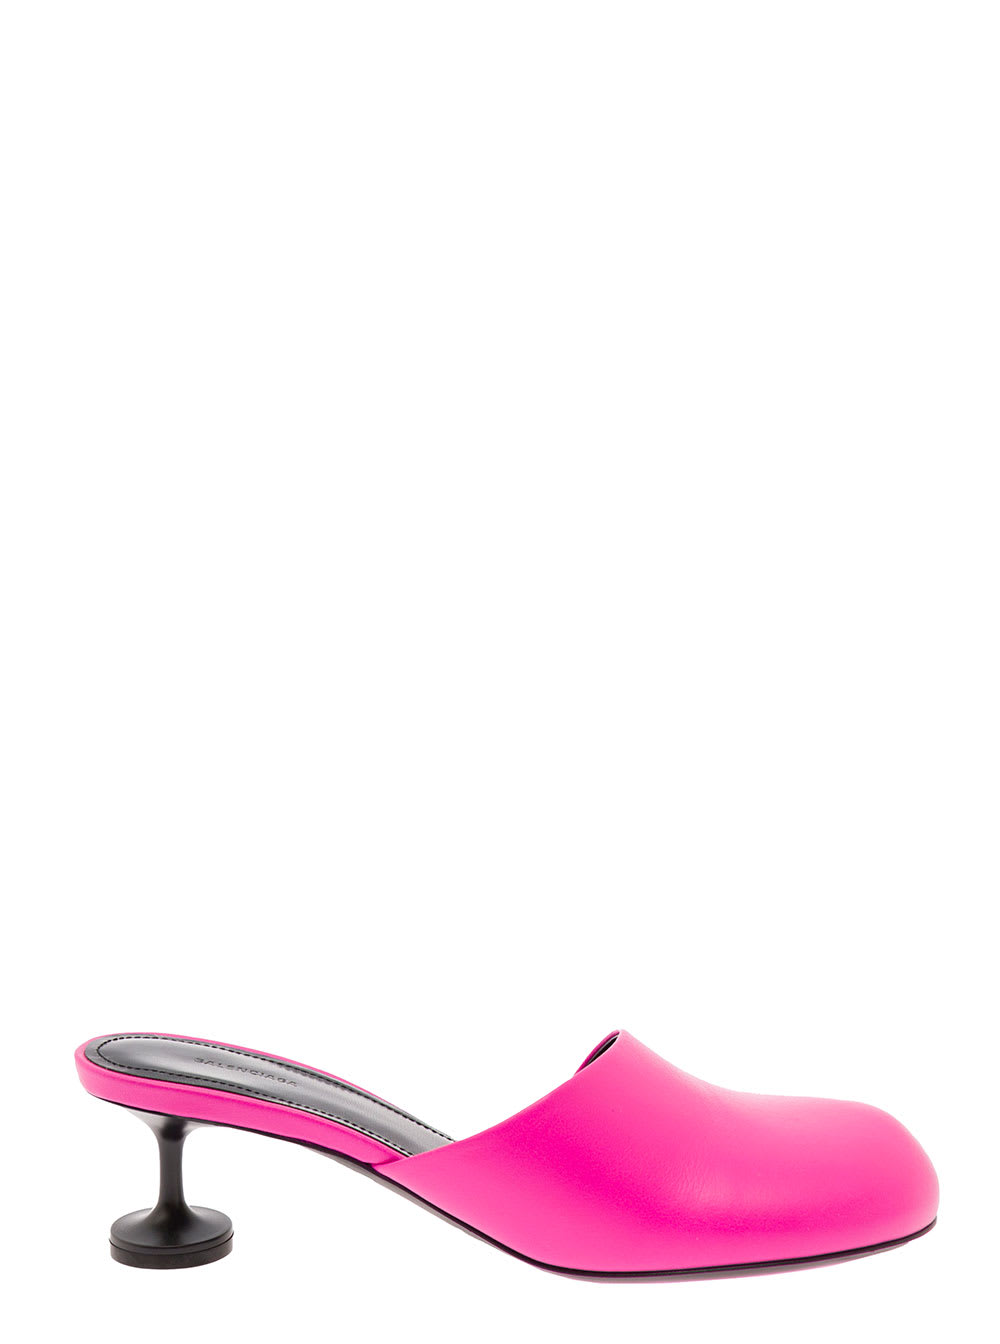 BALENCIAGA FLUO PINK LADY MULE IN LEATHER WITH CHAMPAGNE HEEL BALENCIAGA WOMAN